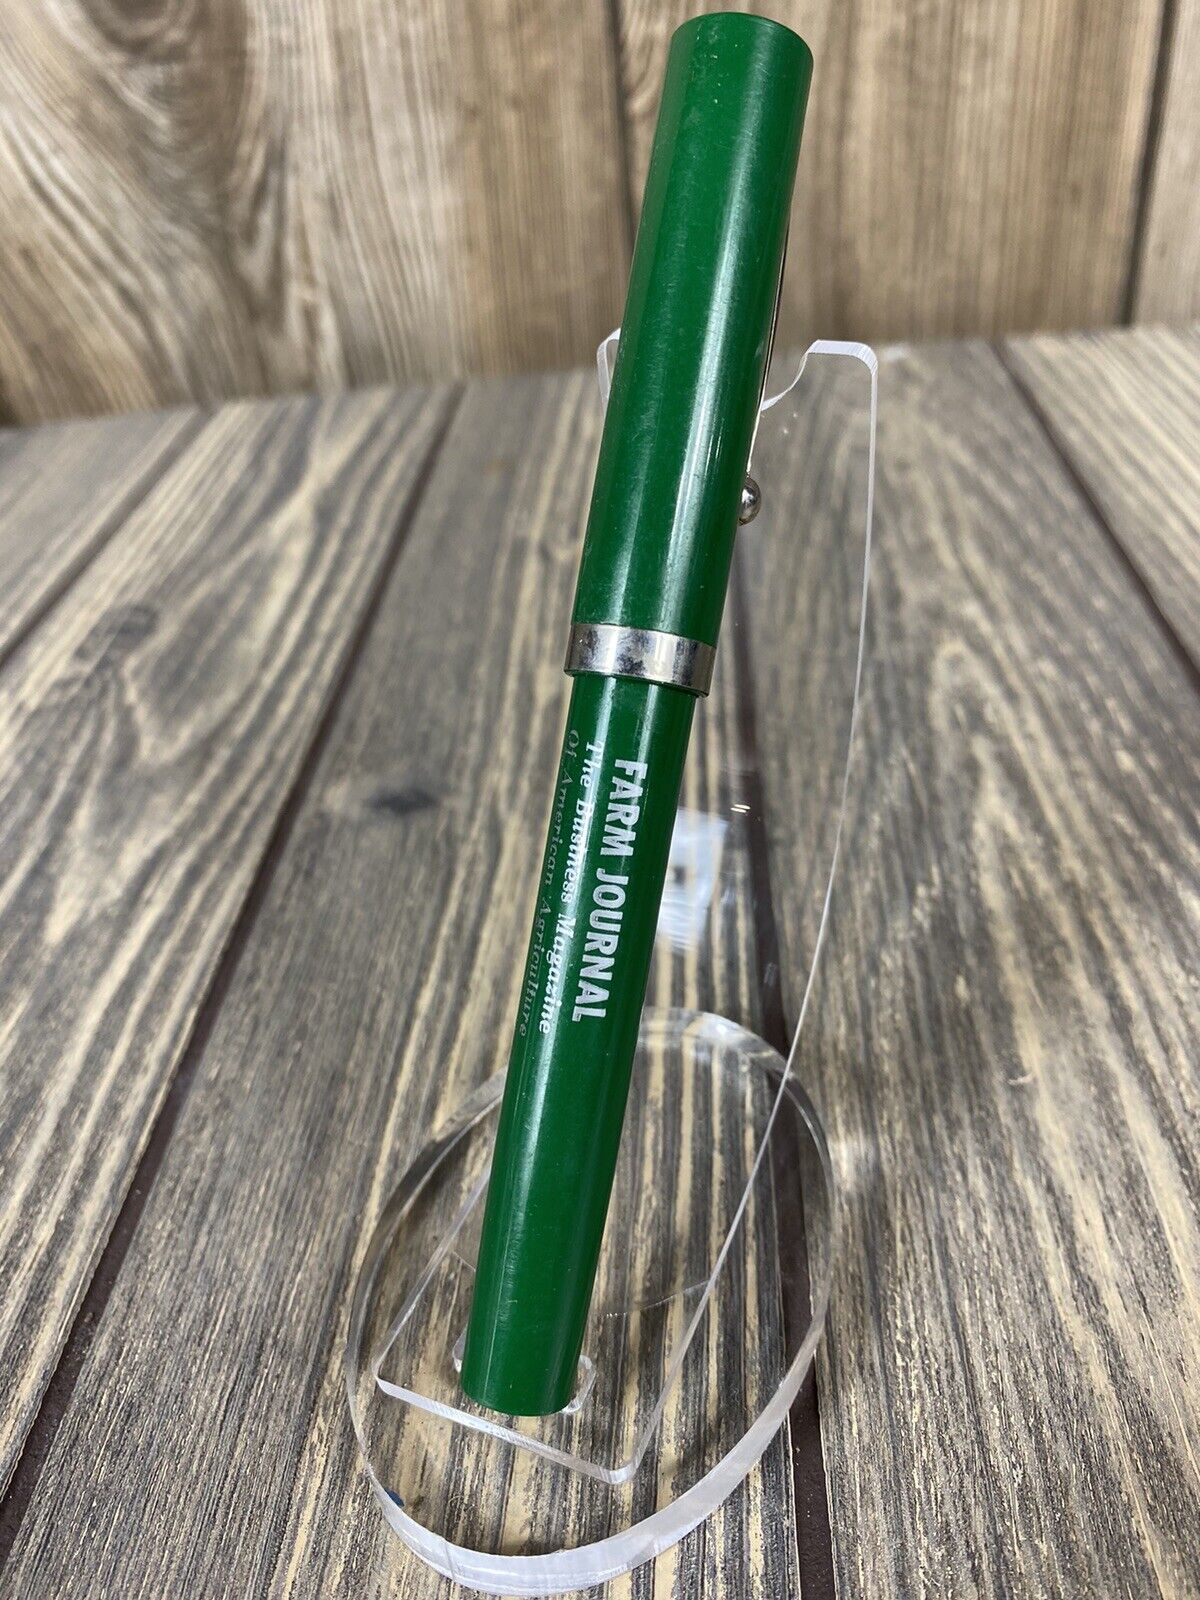 Vintage Green Farm Journal The Business Magazine Pen with Twist Off Lid